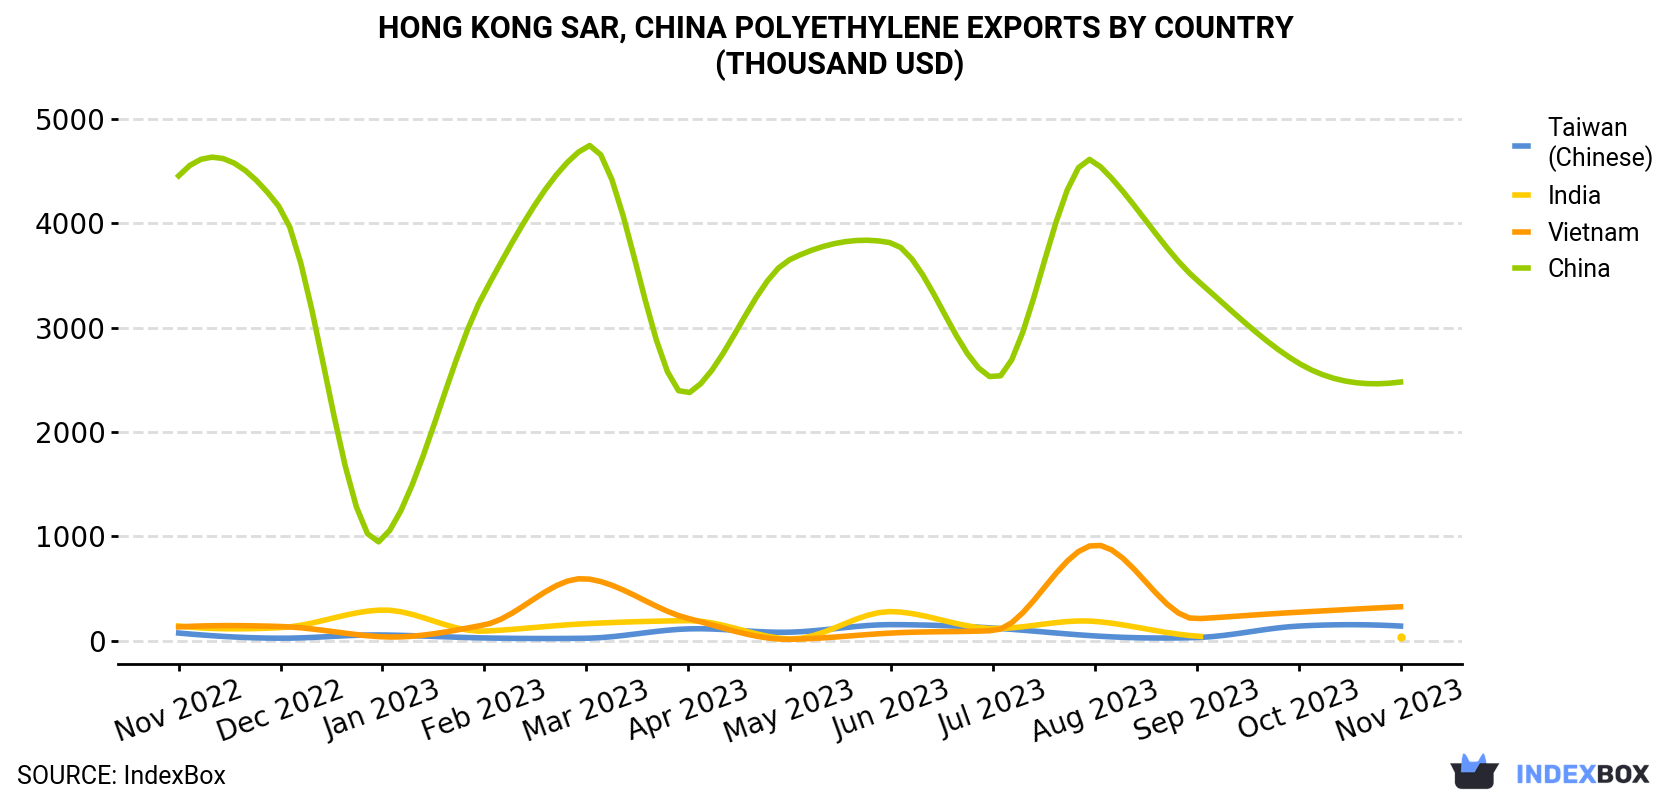 Hong Kong Polyethylene Exports By Country (Thousand USD)